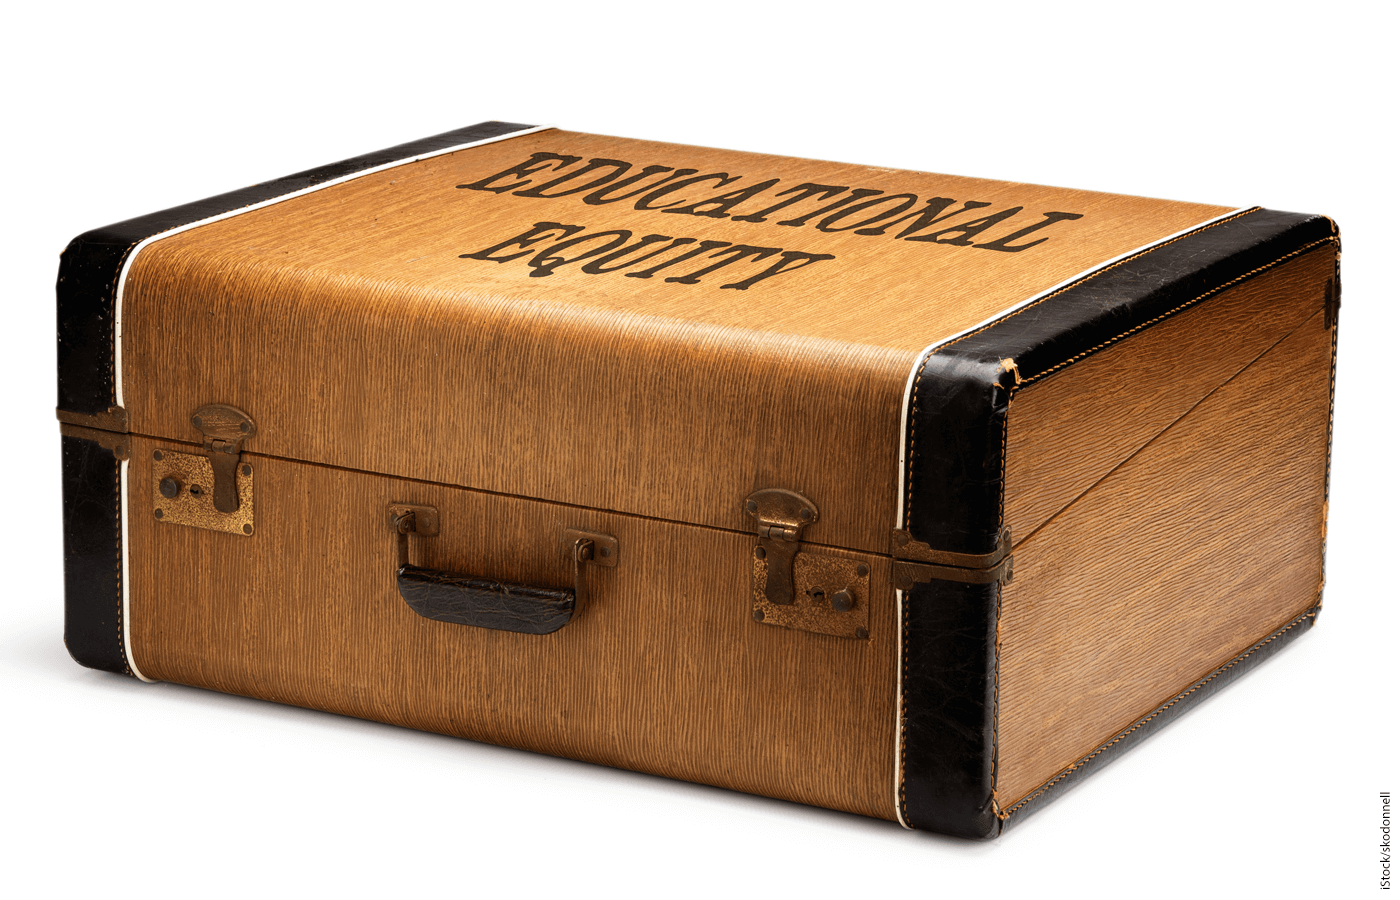 A vintage suitcase with "Education Equity" inscribed on the lid